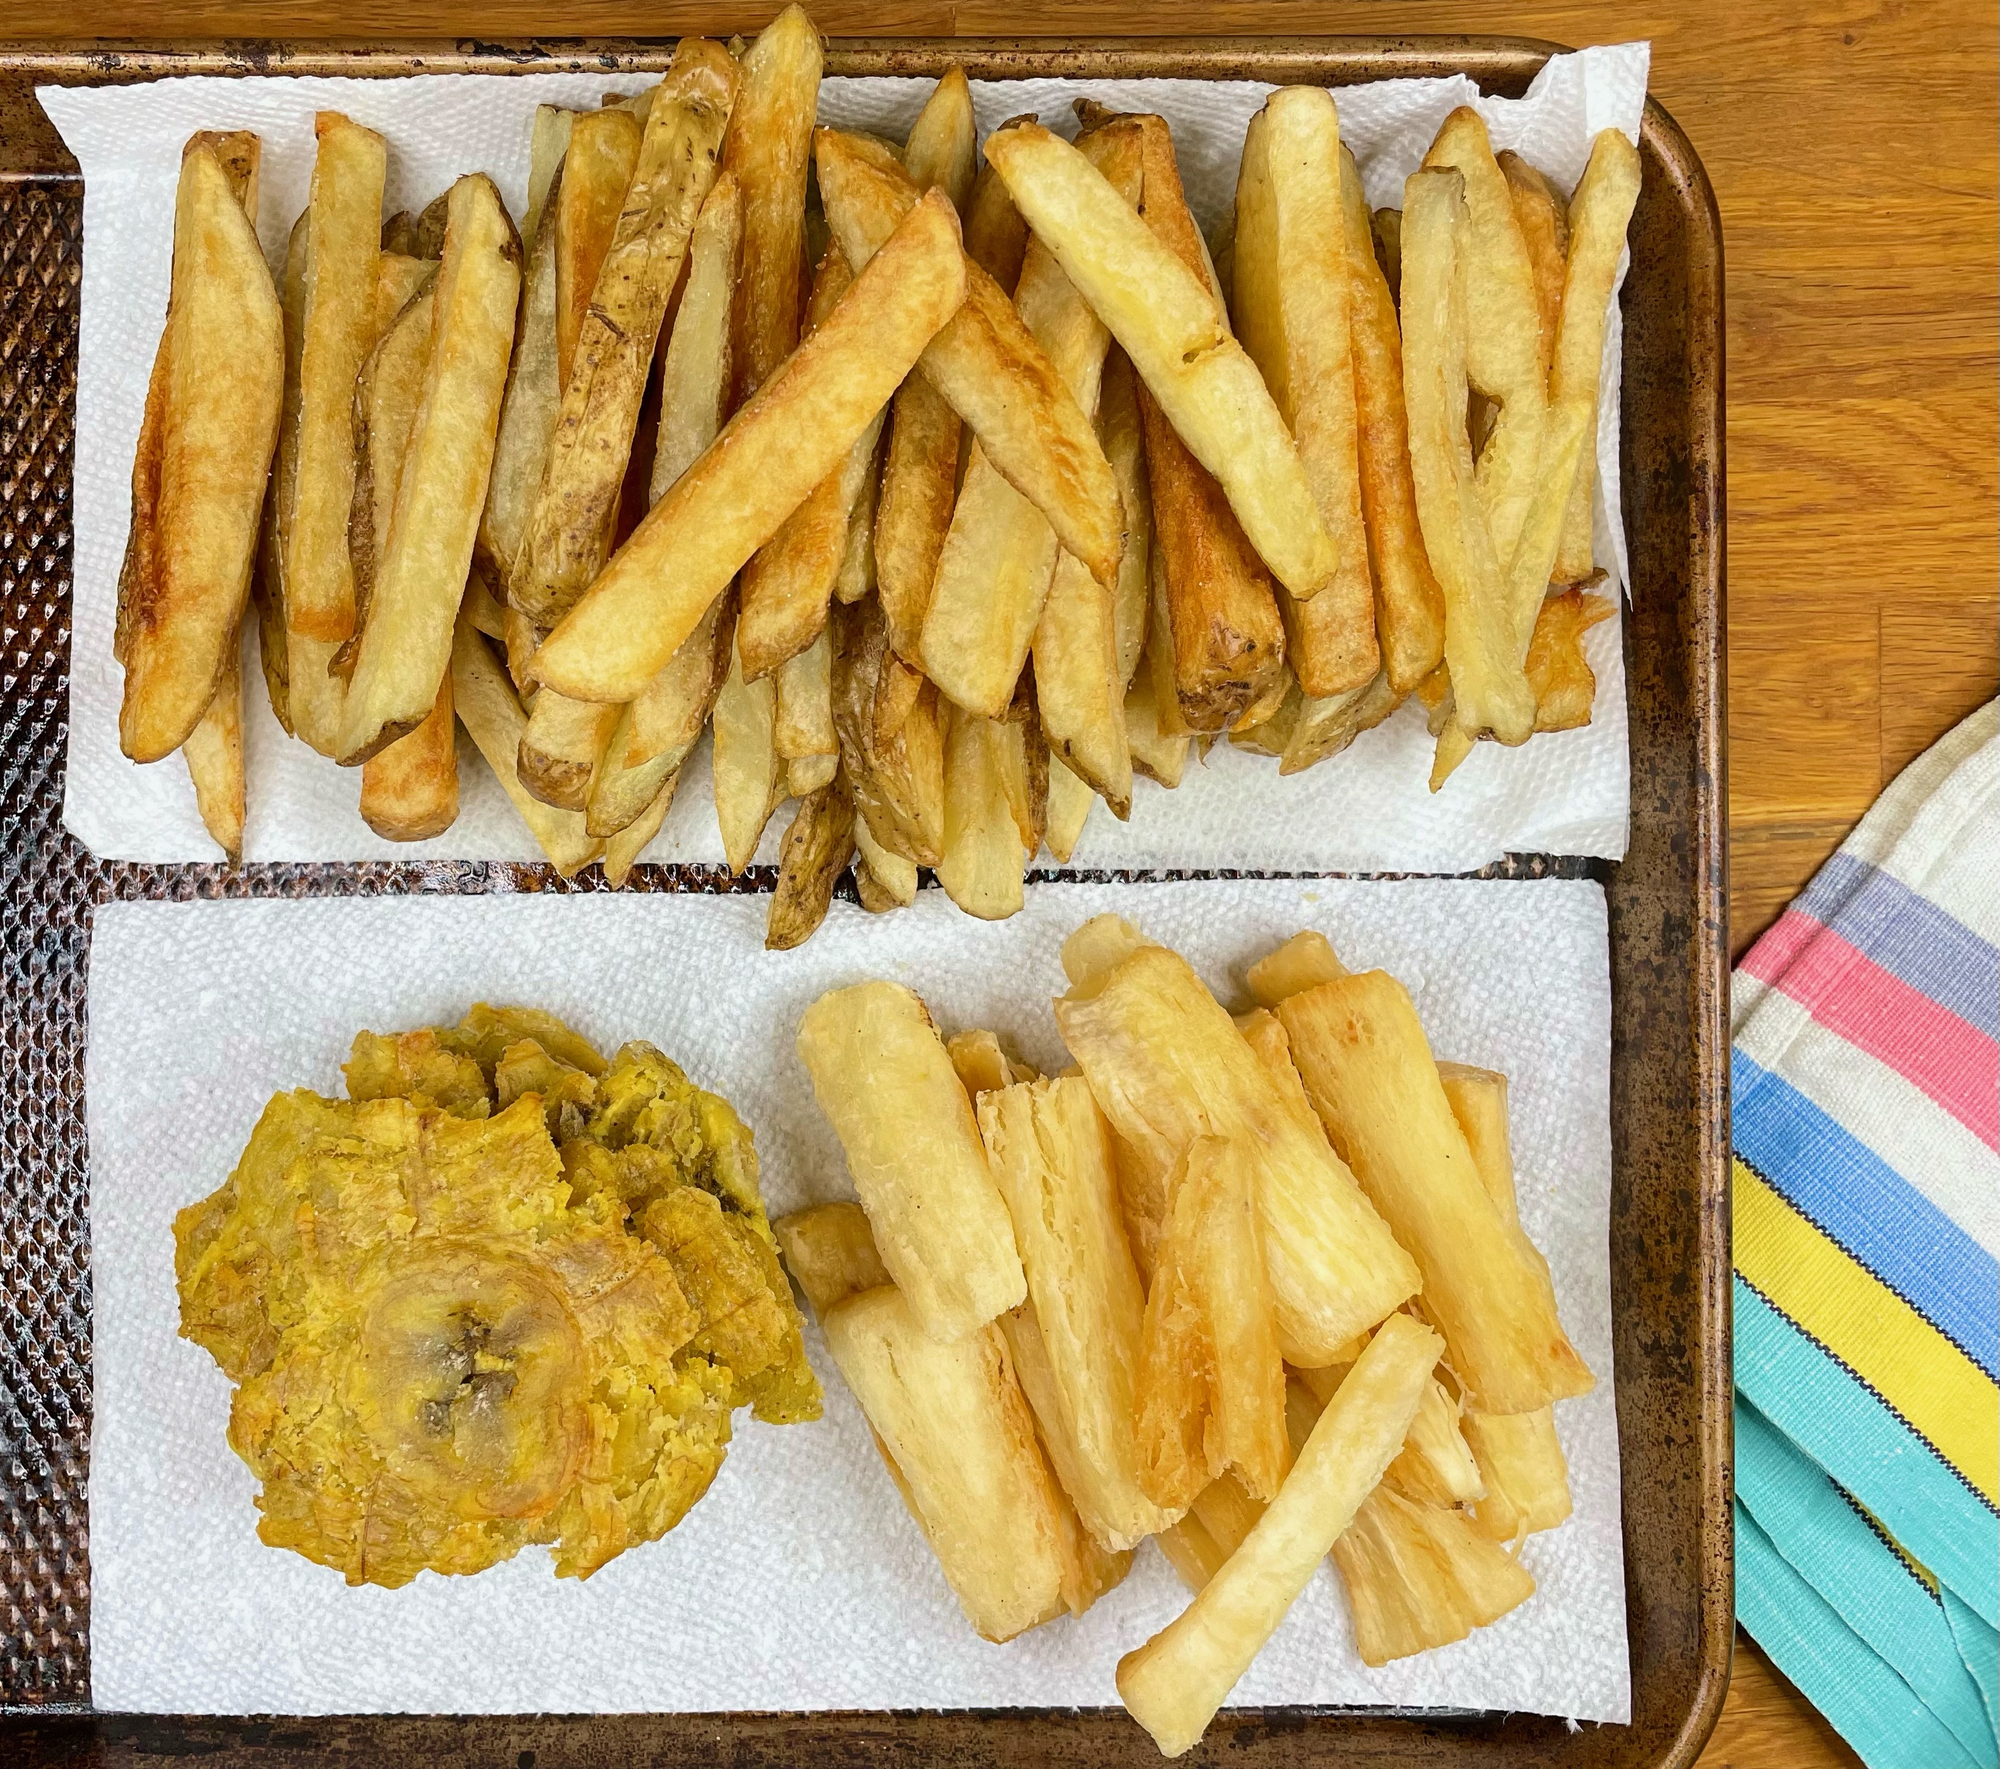 Fried potatoes, yuca root, and plantains on a cookie sheet. 